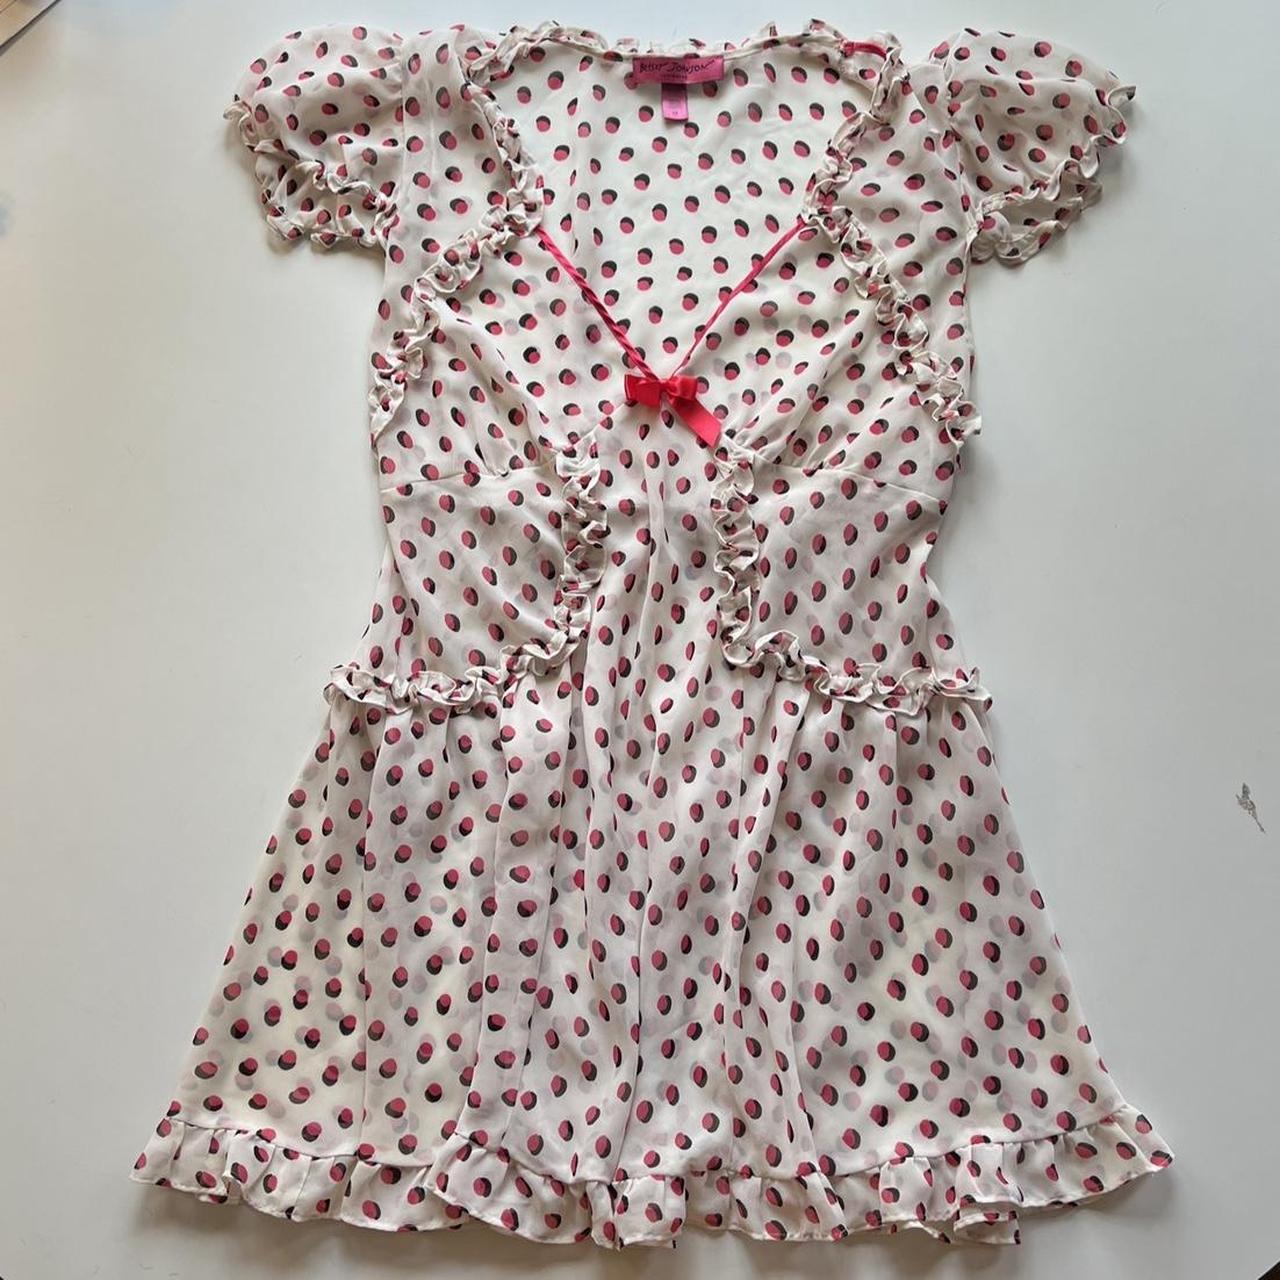 ISO betsey johnson fruit dress willing to pay - Depop